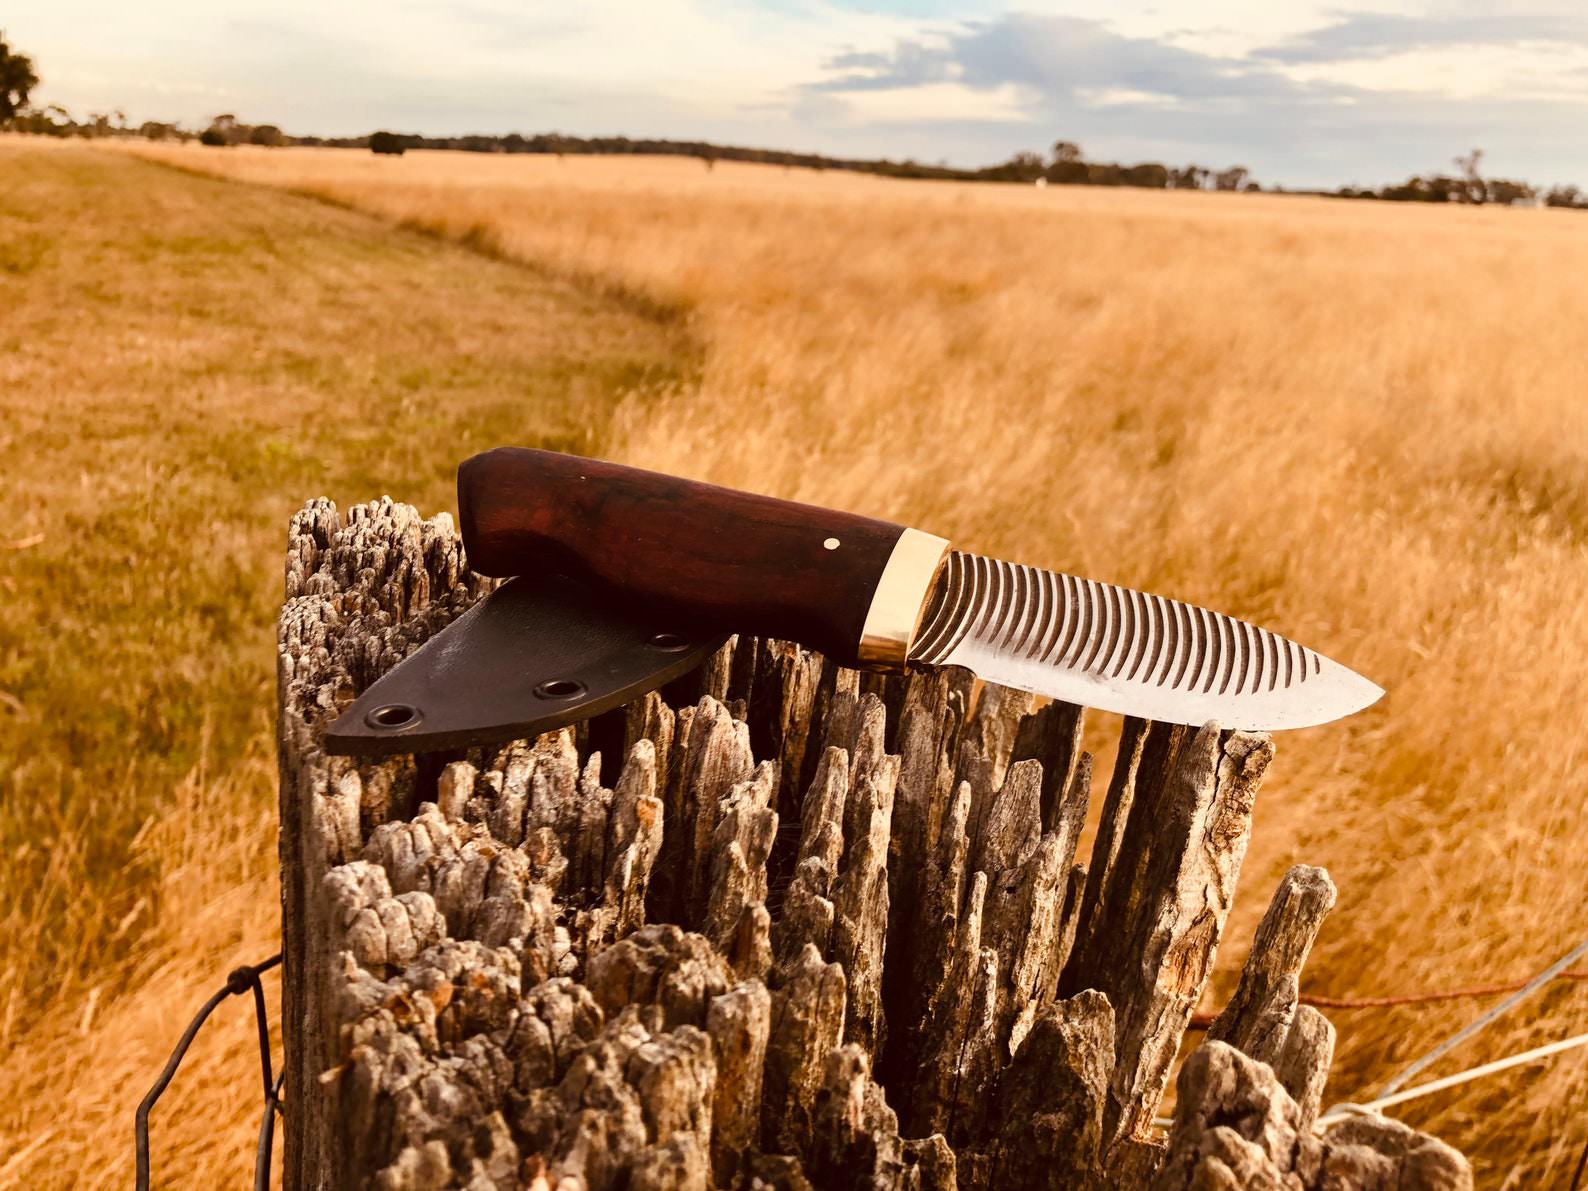 https://silodrome.com/wp-content/uploads/2022/05/Hand-Forged-File-Knife-By-Rustic-Road-Australia-2.jpg